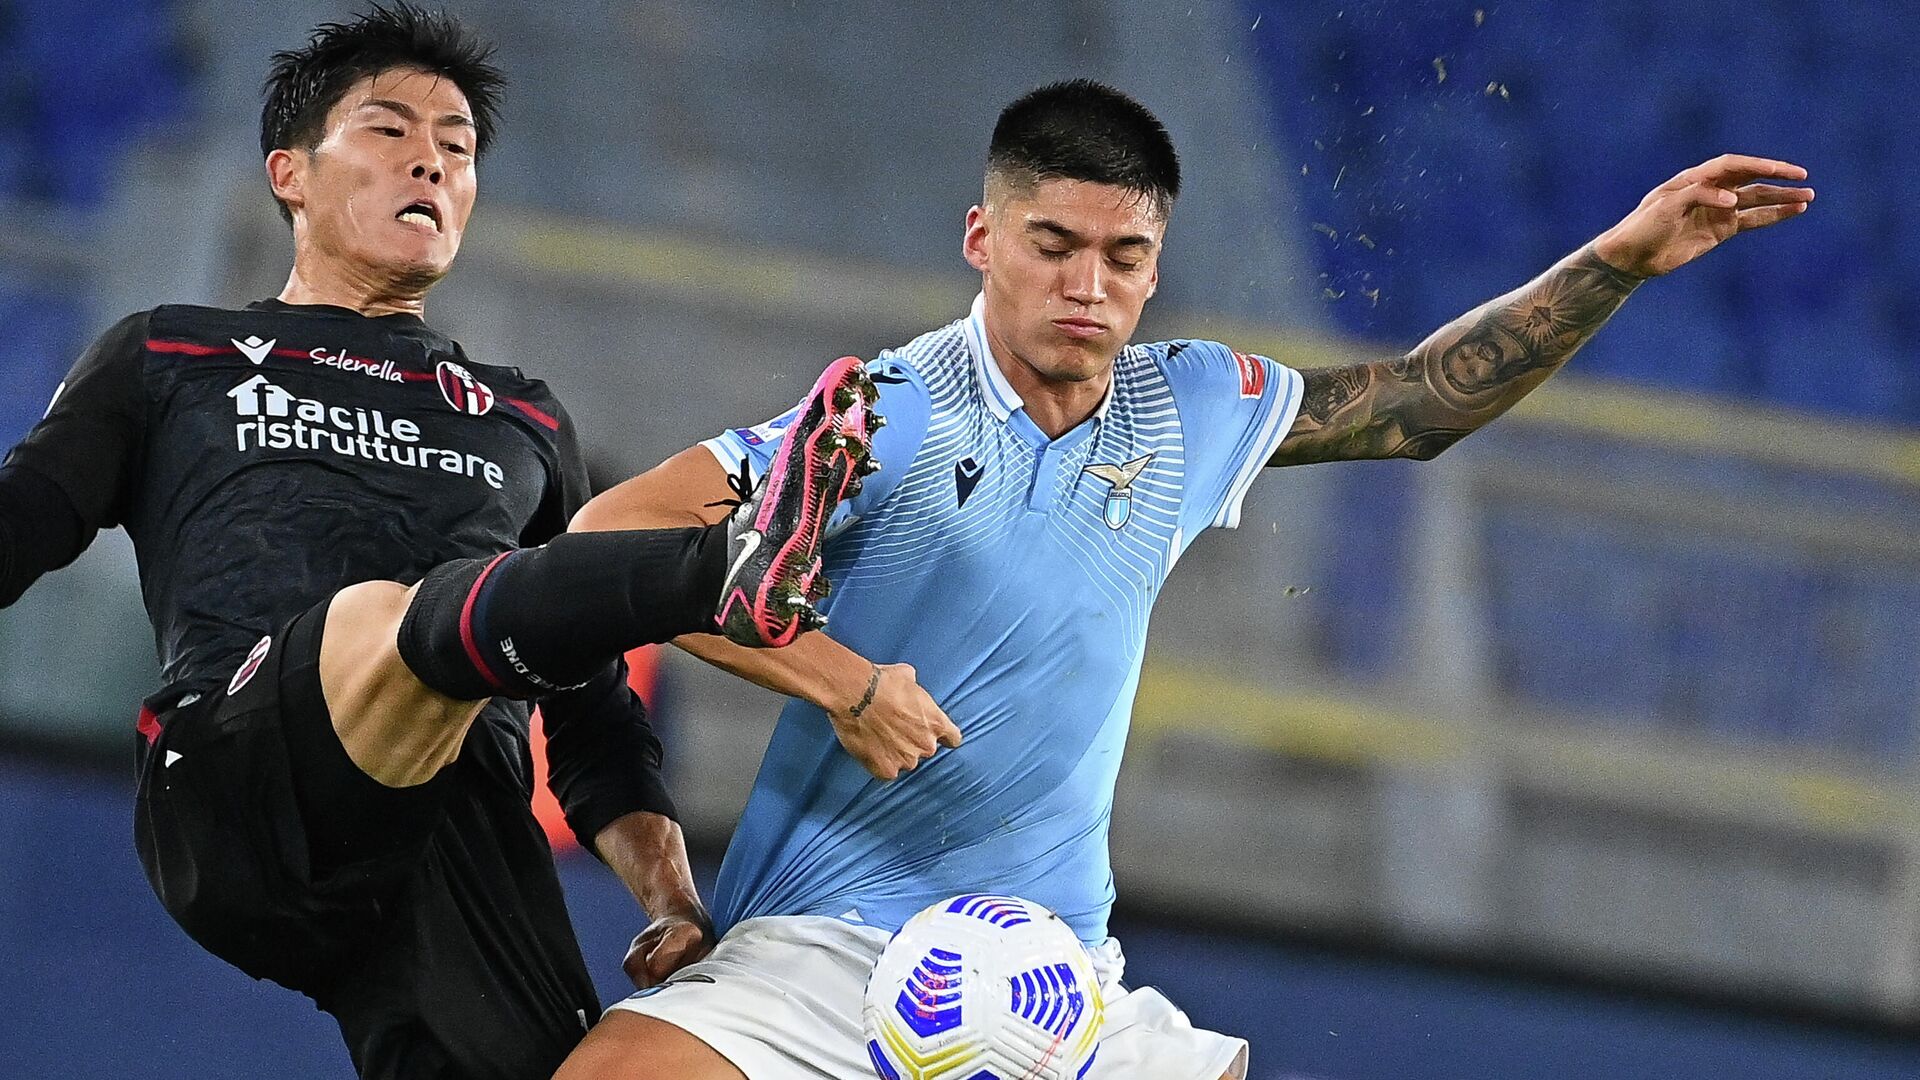 Bologna's Japanese defender Takehiro Tomiyasu (L) fights for the ball with Lazio's Argentine forward Joaquin Correa during the Italian Serie A football match Lazio vs Bologna, at the Olympic stadium in Rome on October 24, 2020. (Photo by Vincenzo PINTO / AFP) - РИА Новости, 1920, 01.09.2021